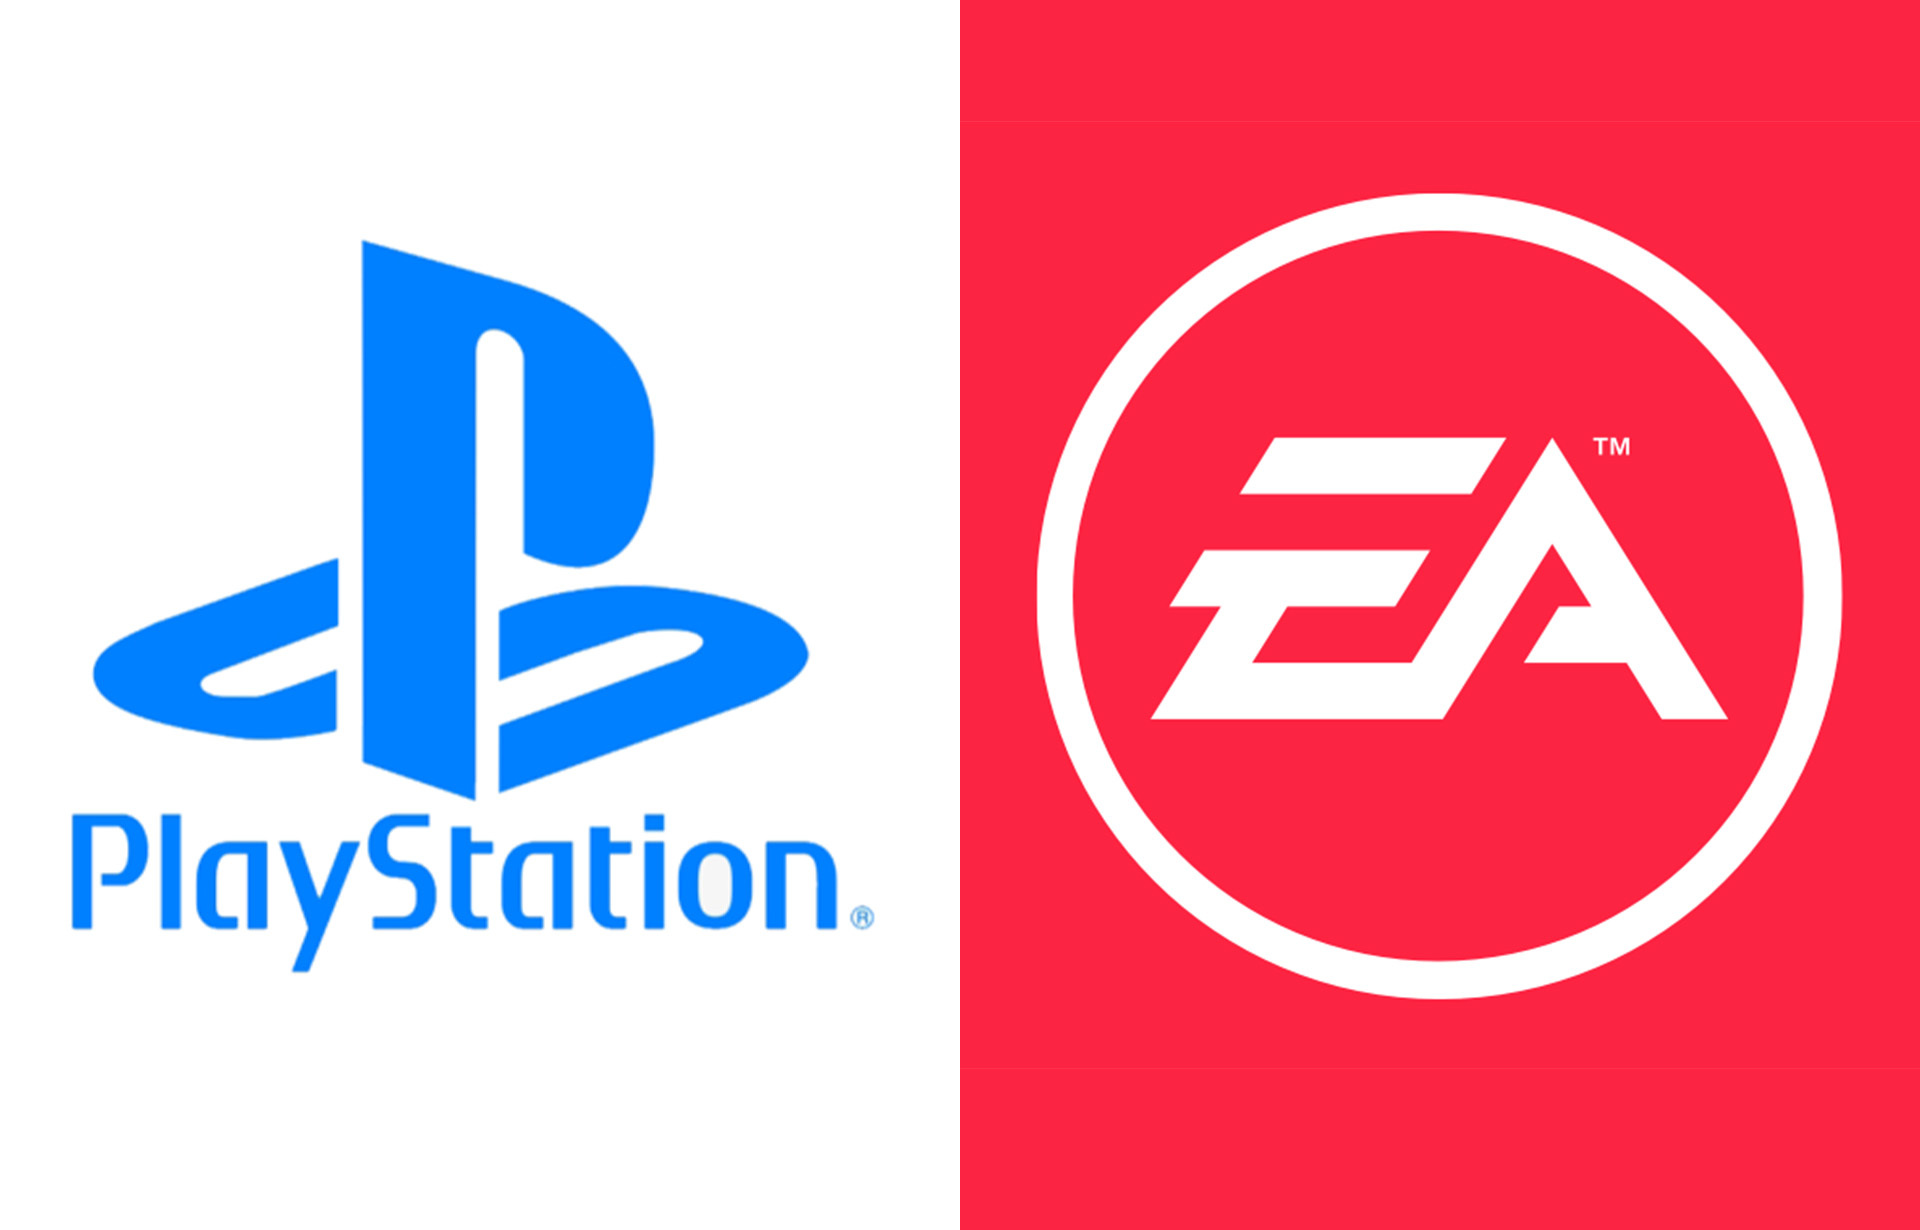 Tæmme Potentiel offset Will Sony Buy EA? | EarlyGame